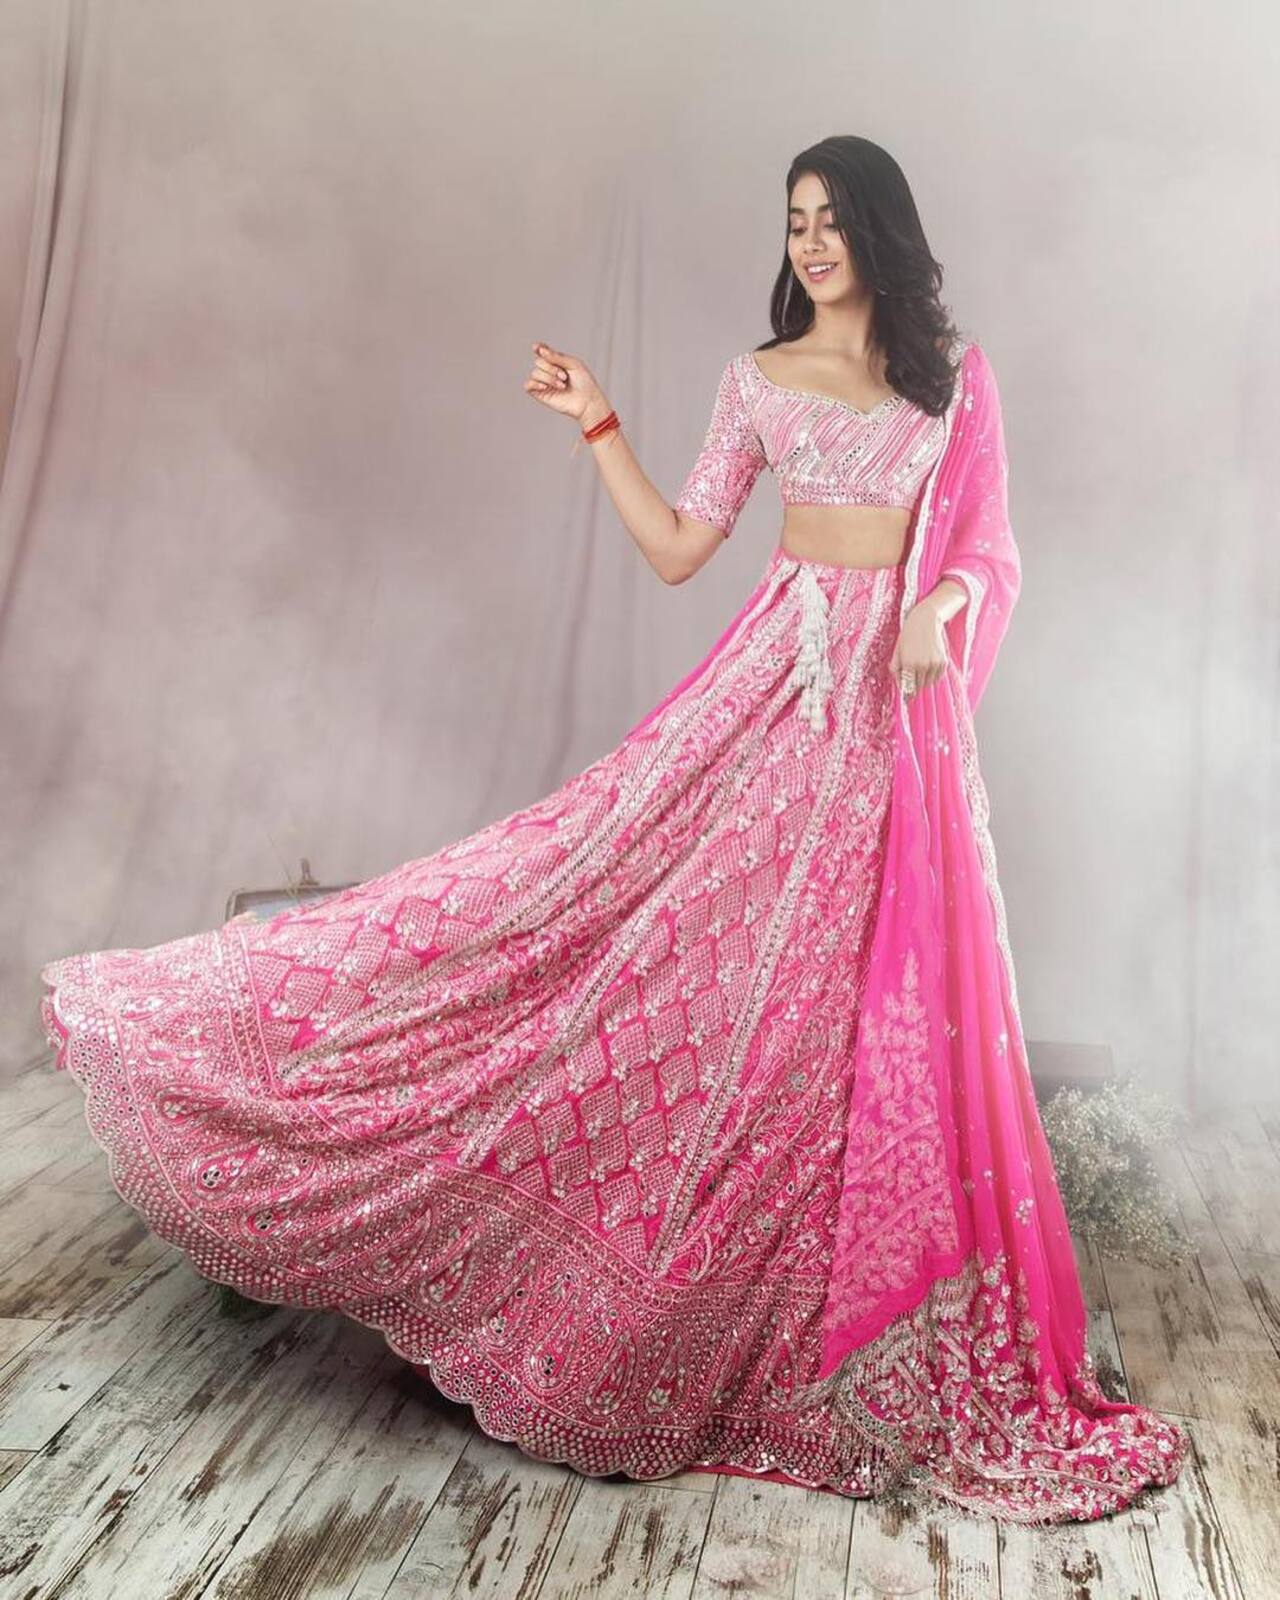 Janhvi Kapoor
For Akash Ambani and Shloka Mehta’s reception, the star wore a fuschia pink Manish Malhotra lehenga. The ensemble had silver thread embroidery with paisley and kite motifs. The blouse had a curvy neckline and mirror embellishments. Janhvi Kapoor completed the look with a matching dupatta, diamond earrings, and delicate finger rings